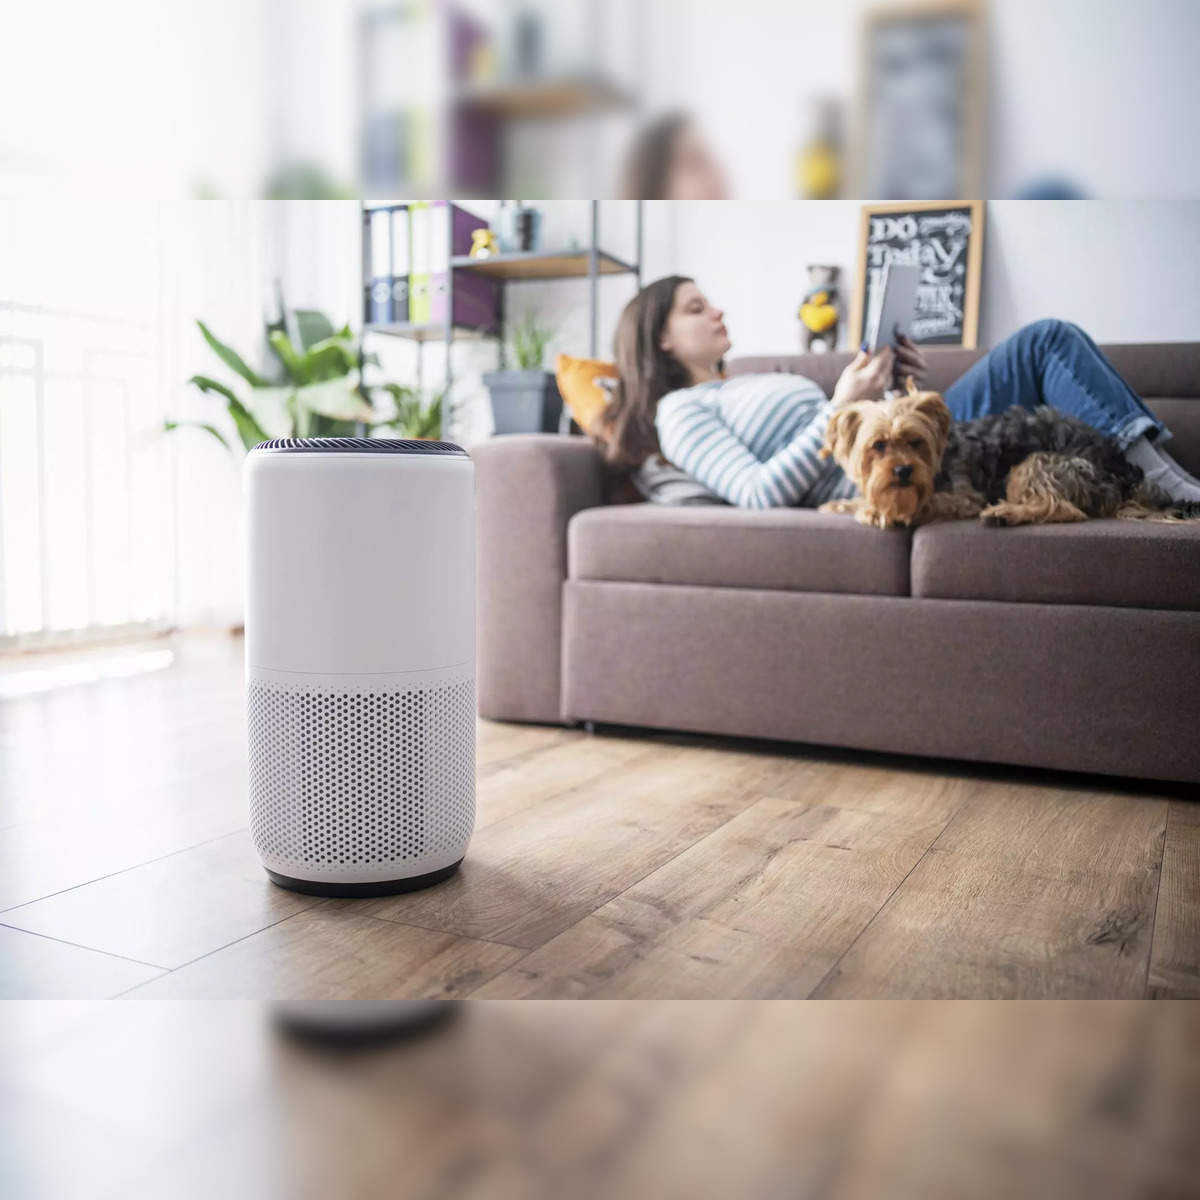 The 9 Best Air Purifiers For Dust in 2023 - Home Air Purifying Systems